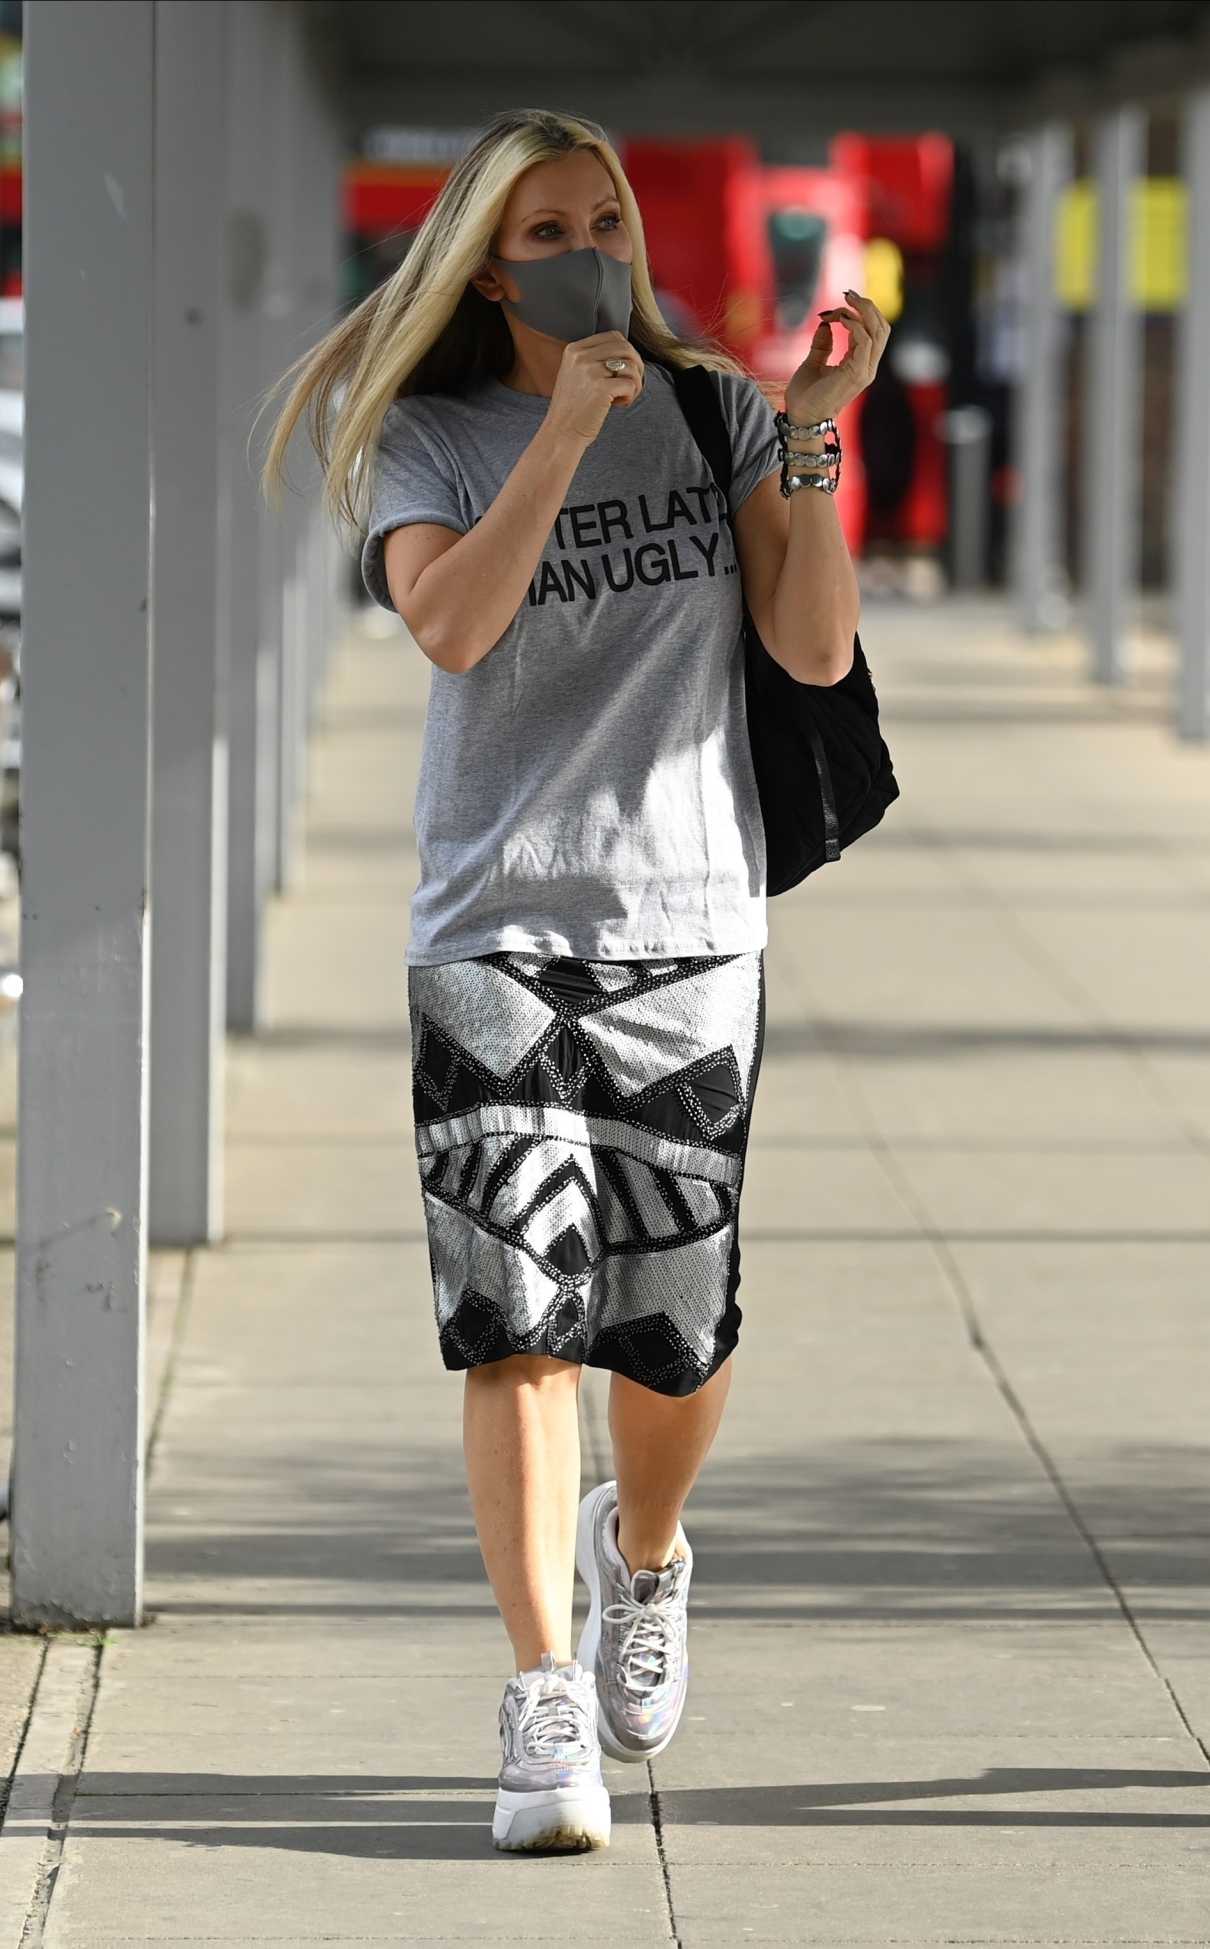 Caprice Bourret in a Gray Tee